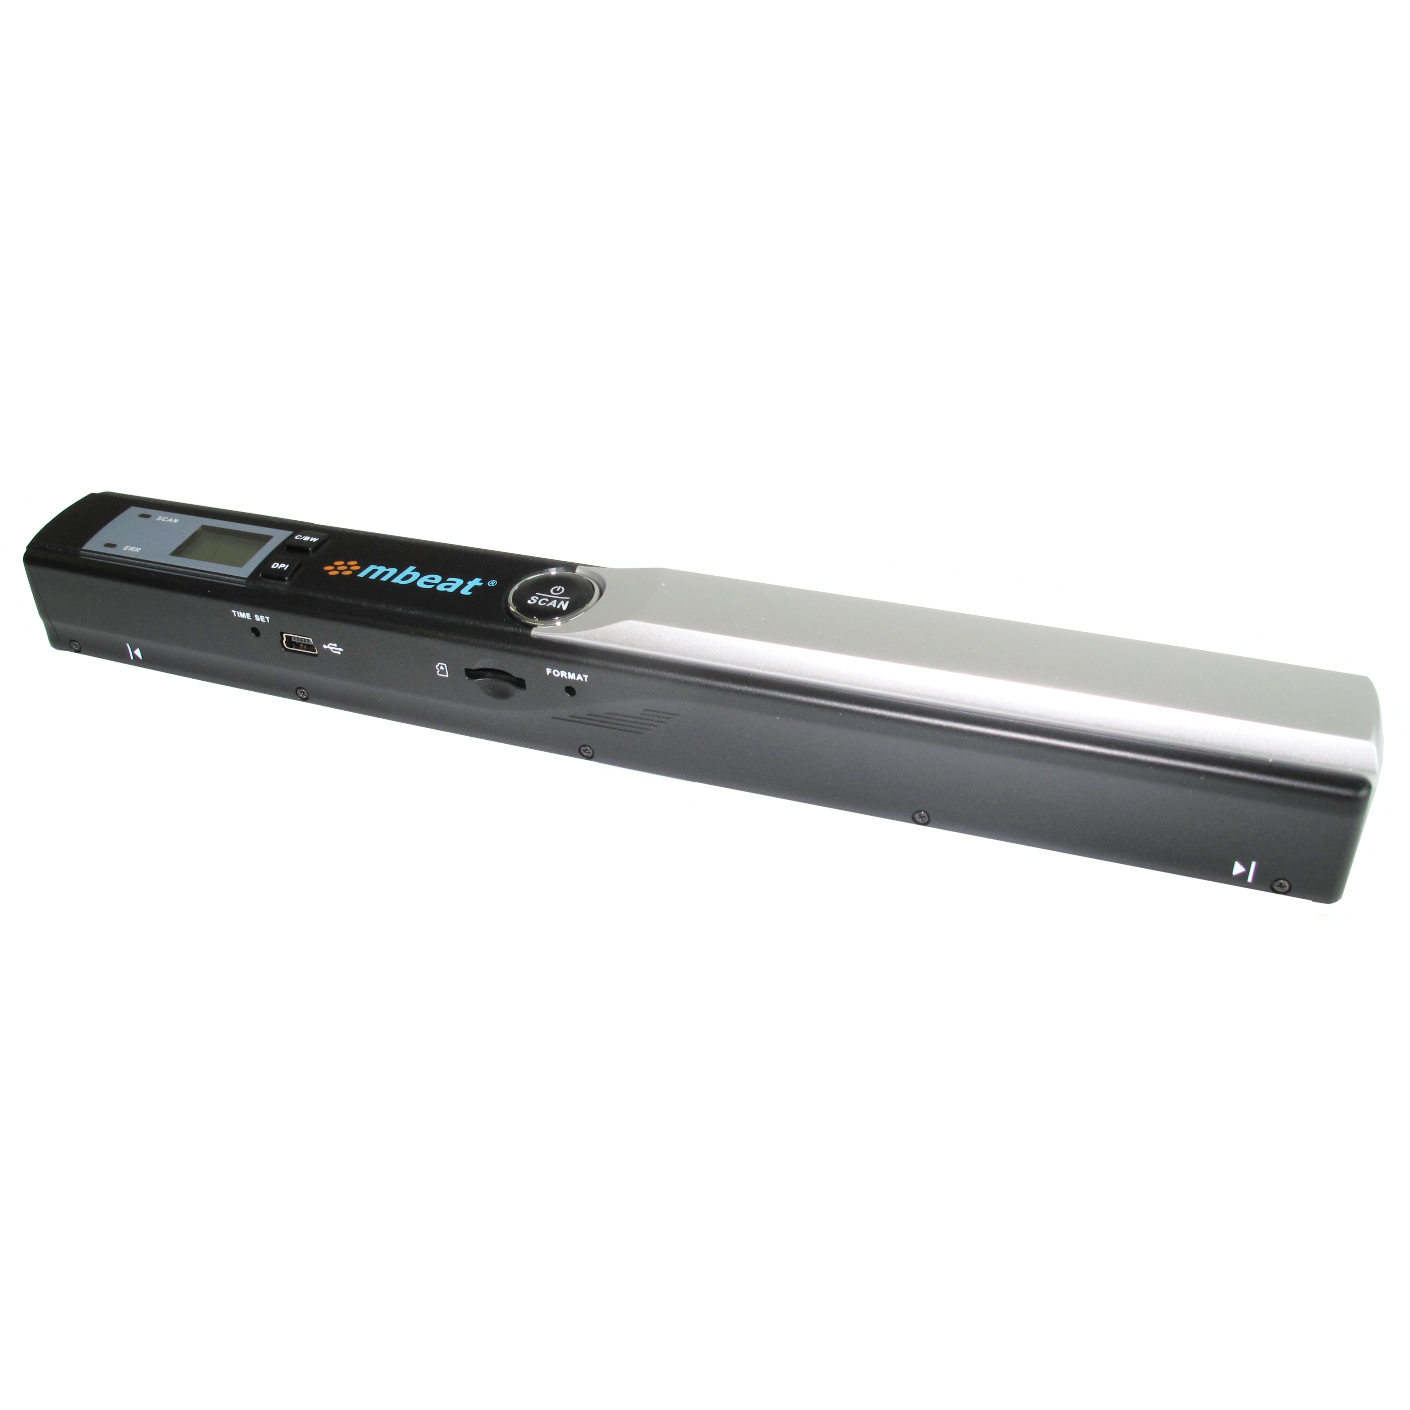 mbeat® Portable image and document scanner 